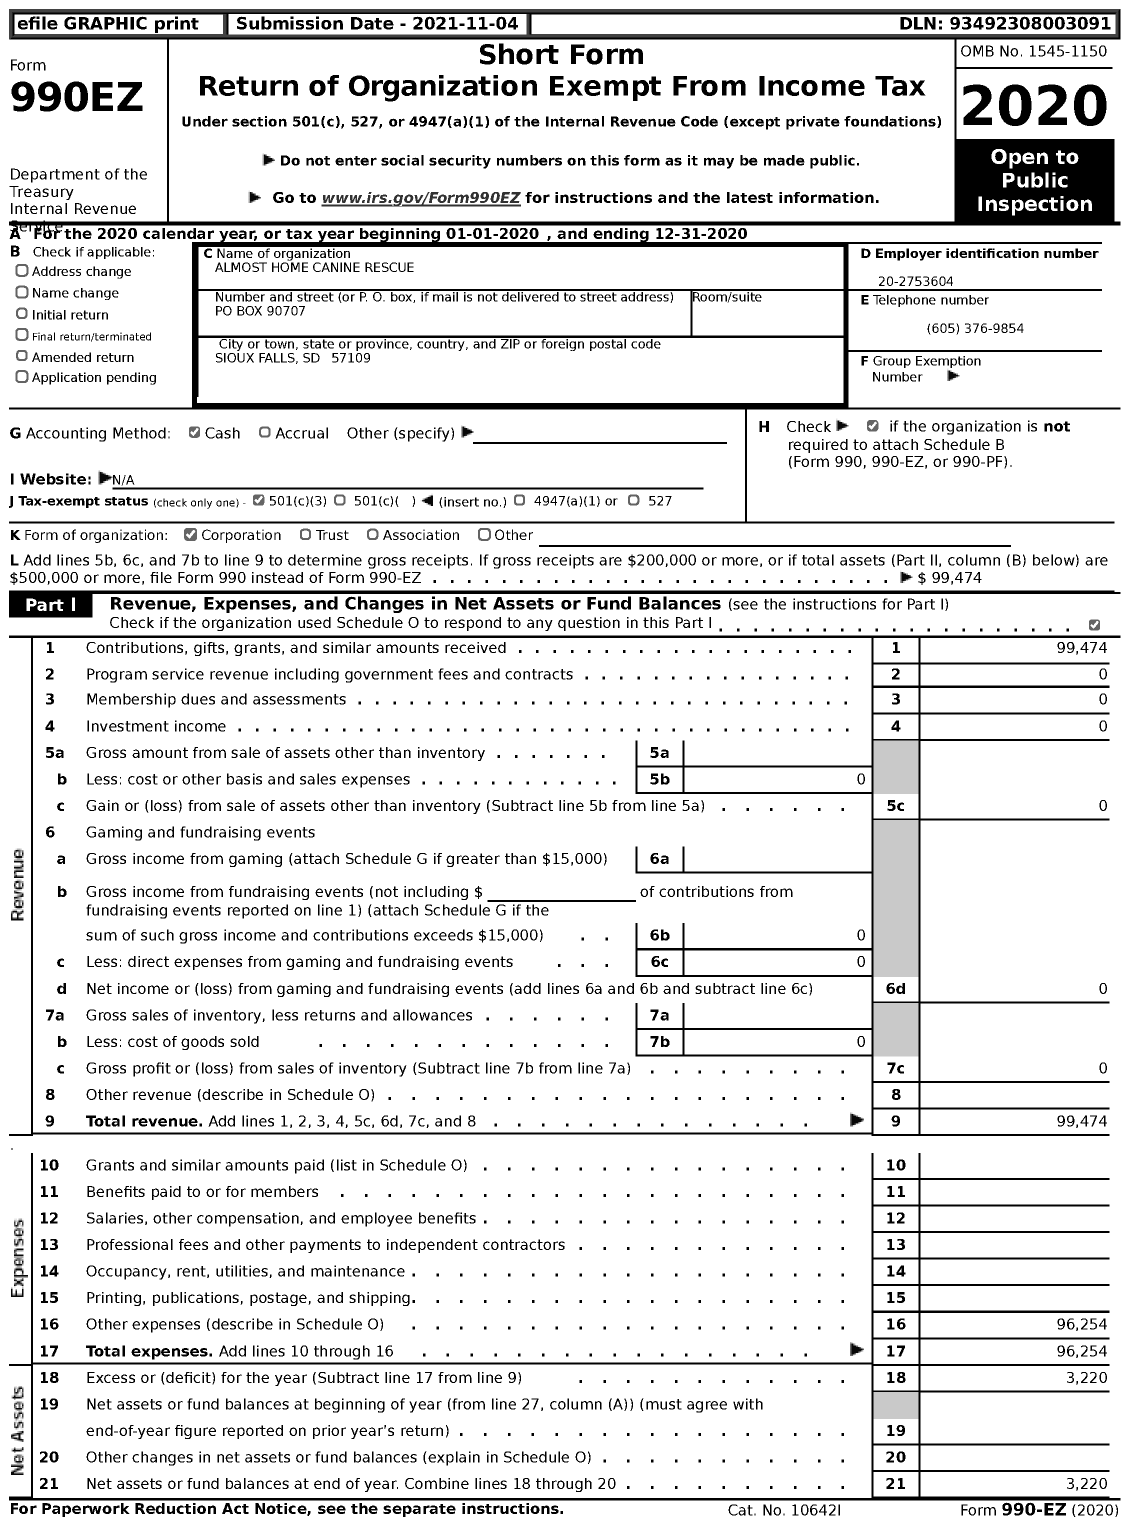 Image of first page of 2020 Form 990EZ for Almost Home Canine Rescue (AHCR)